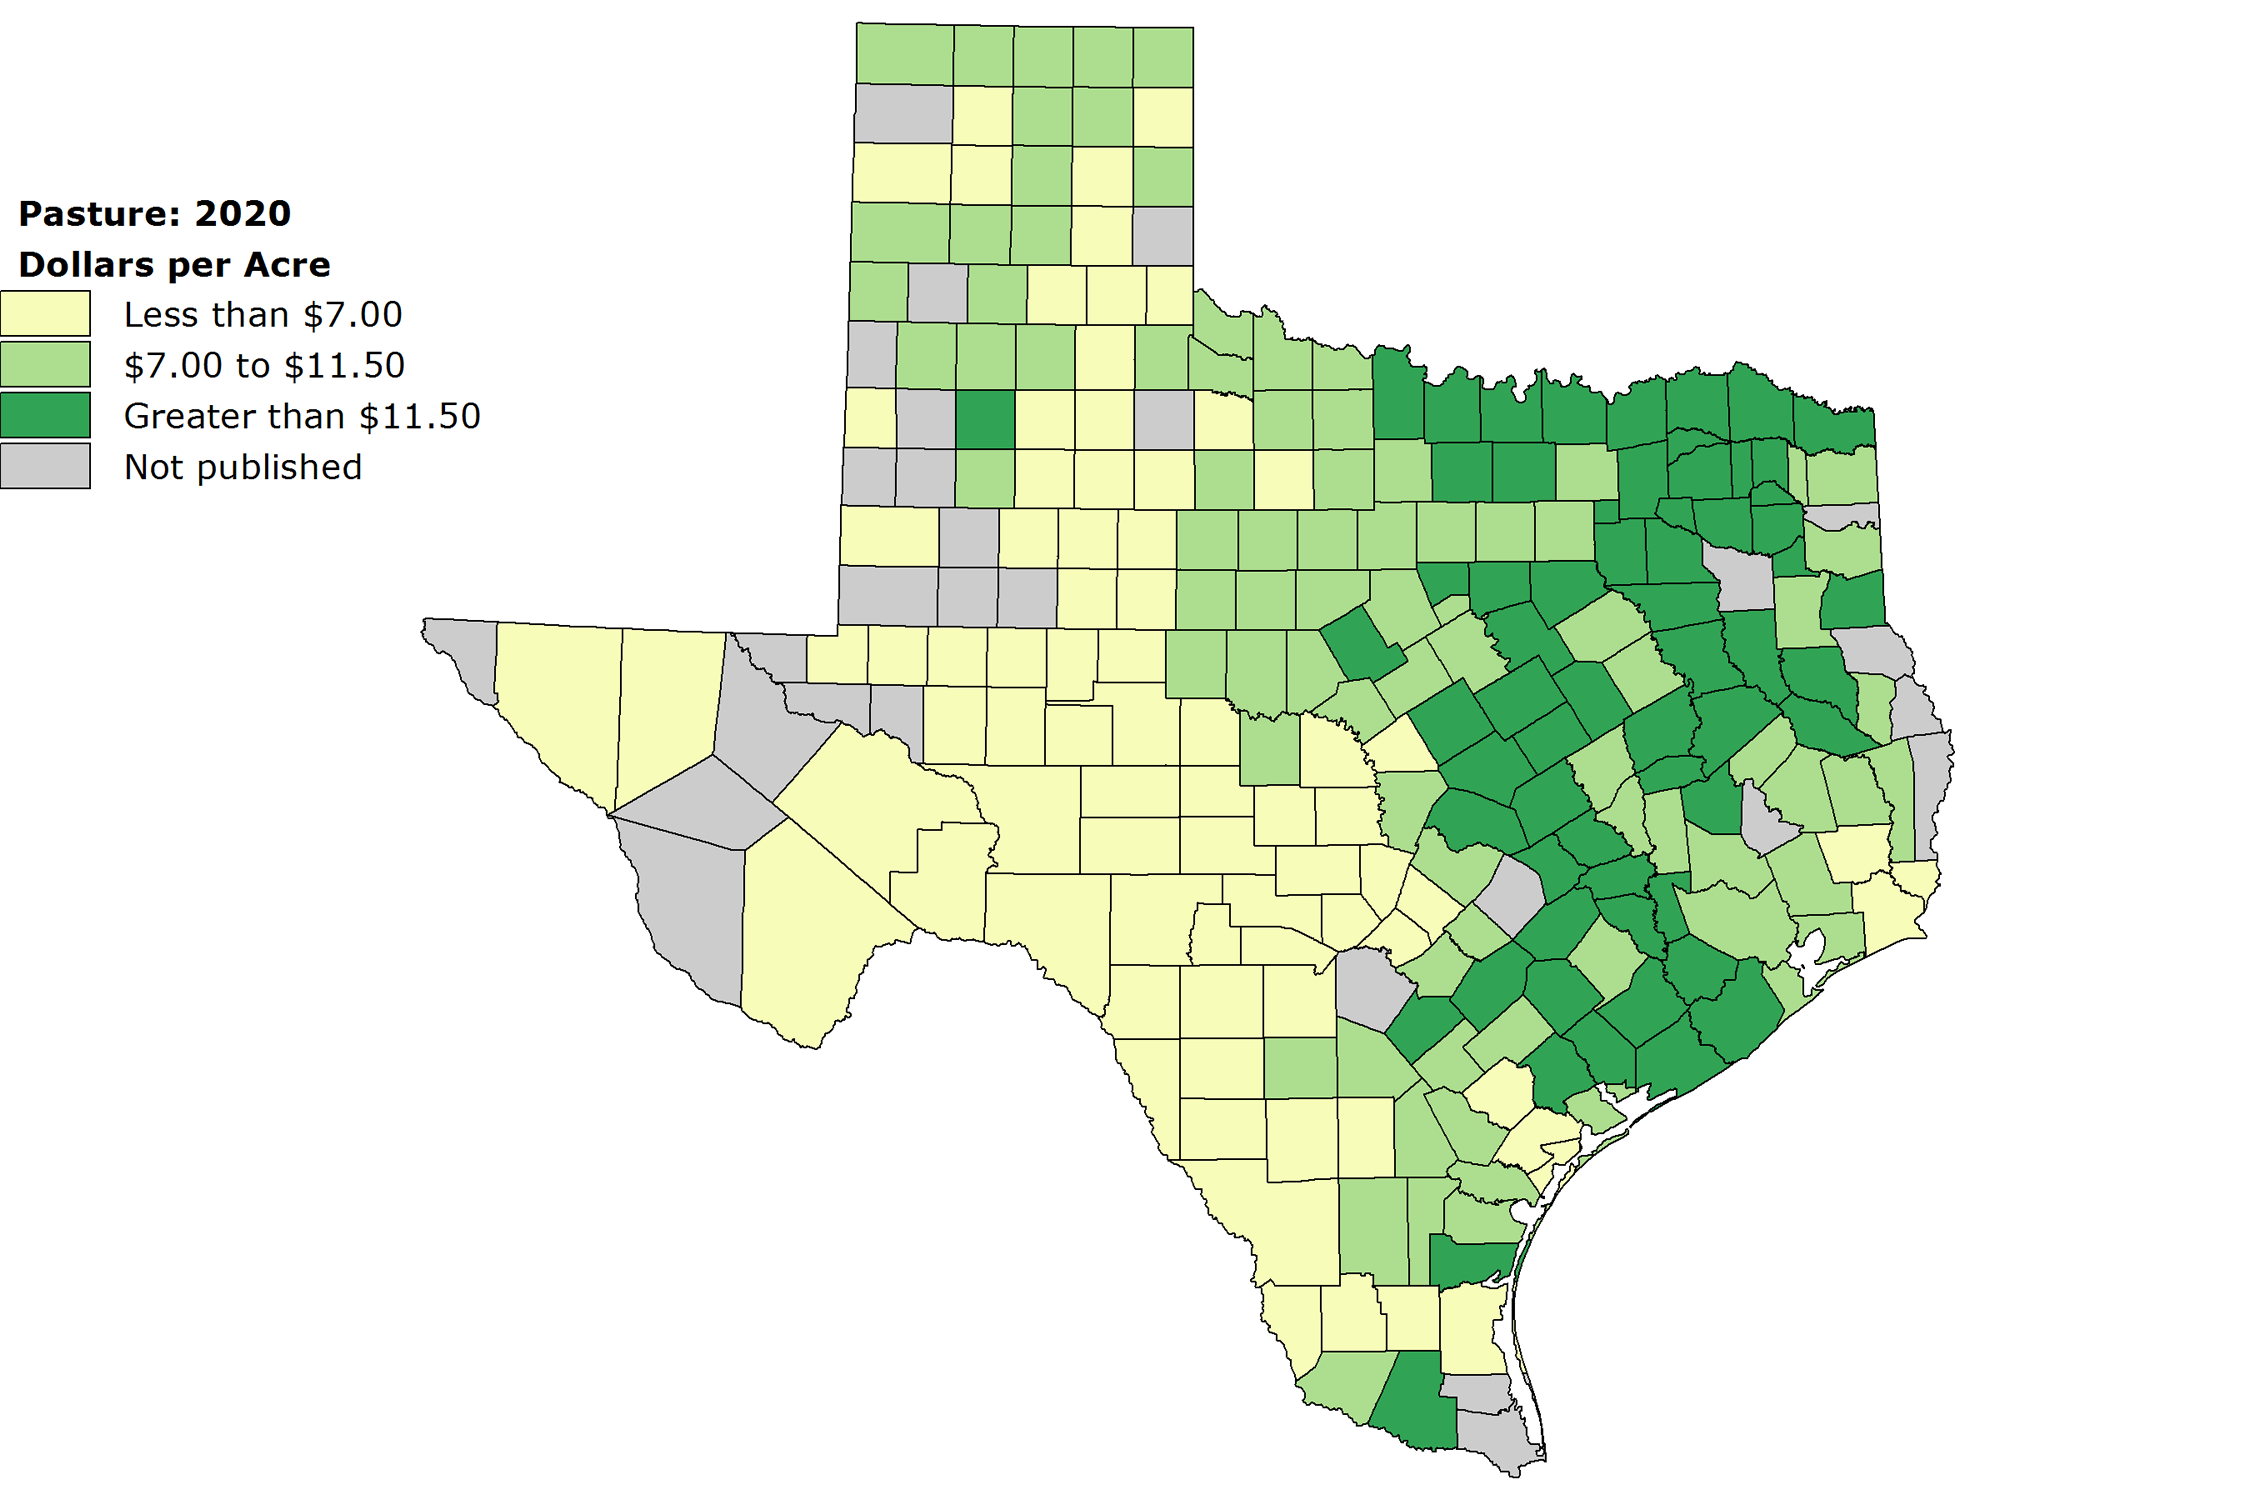 A shaded map of Texas showing dollars per acres of rented pastureland.